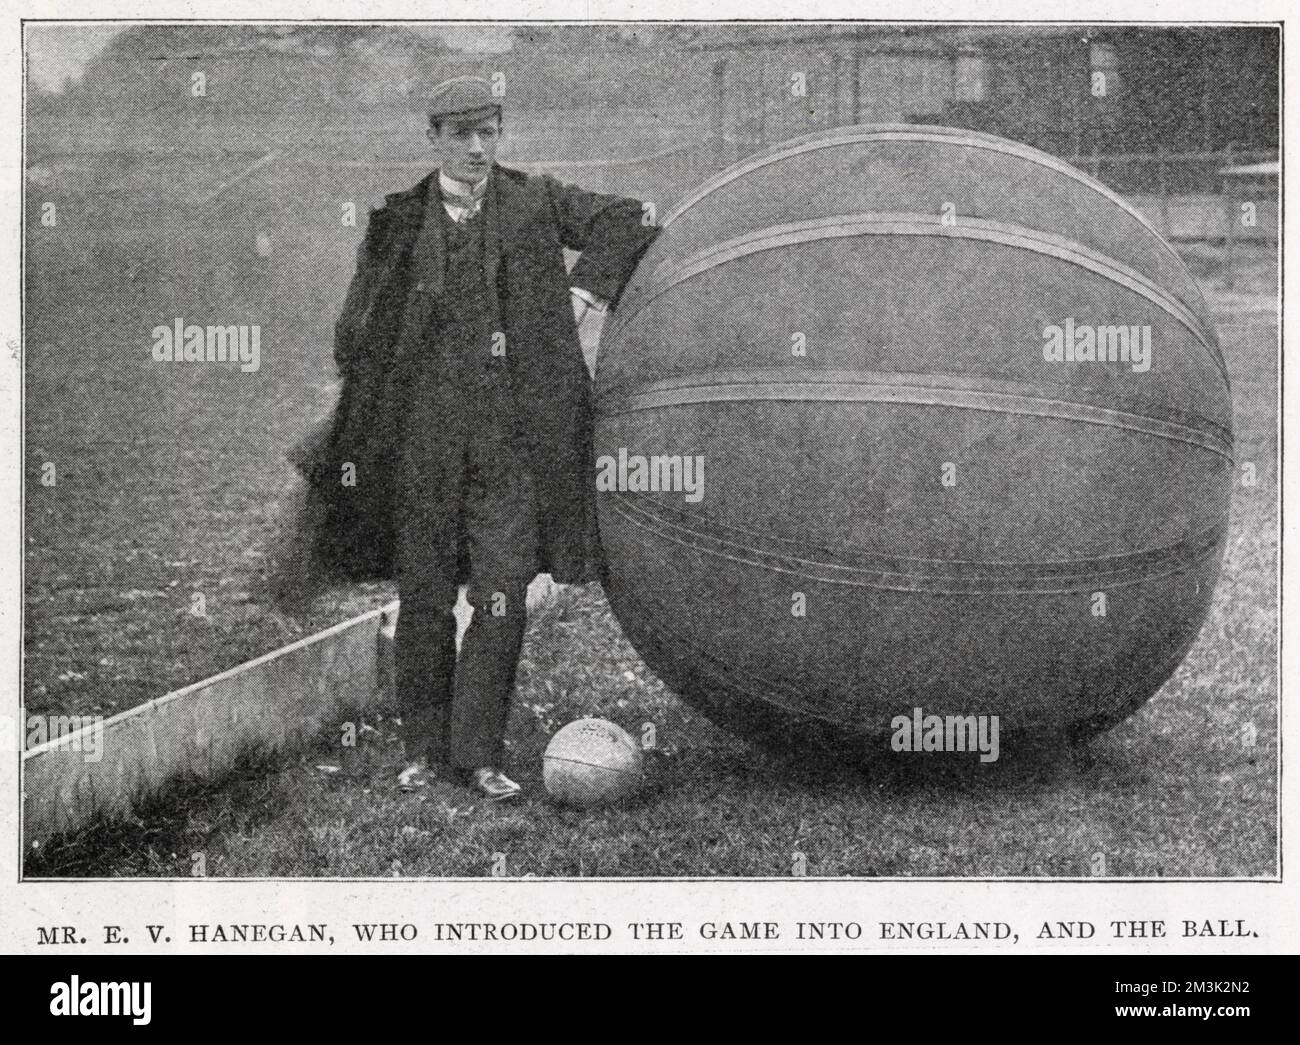 E.V. Hanegan, who introduced the game of 'pushball' to England (the sport was invented in the USA). Hanegan is seen standing beside a 'pushball', which weighed 50lb, at the Crystal Palace sports ground, October 1902. Stock Photo